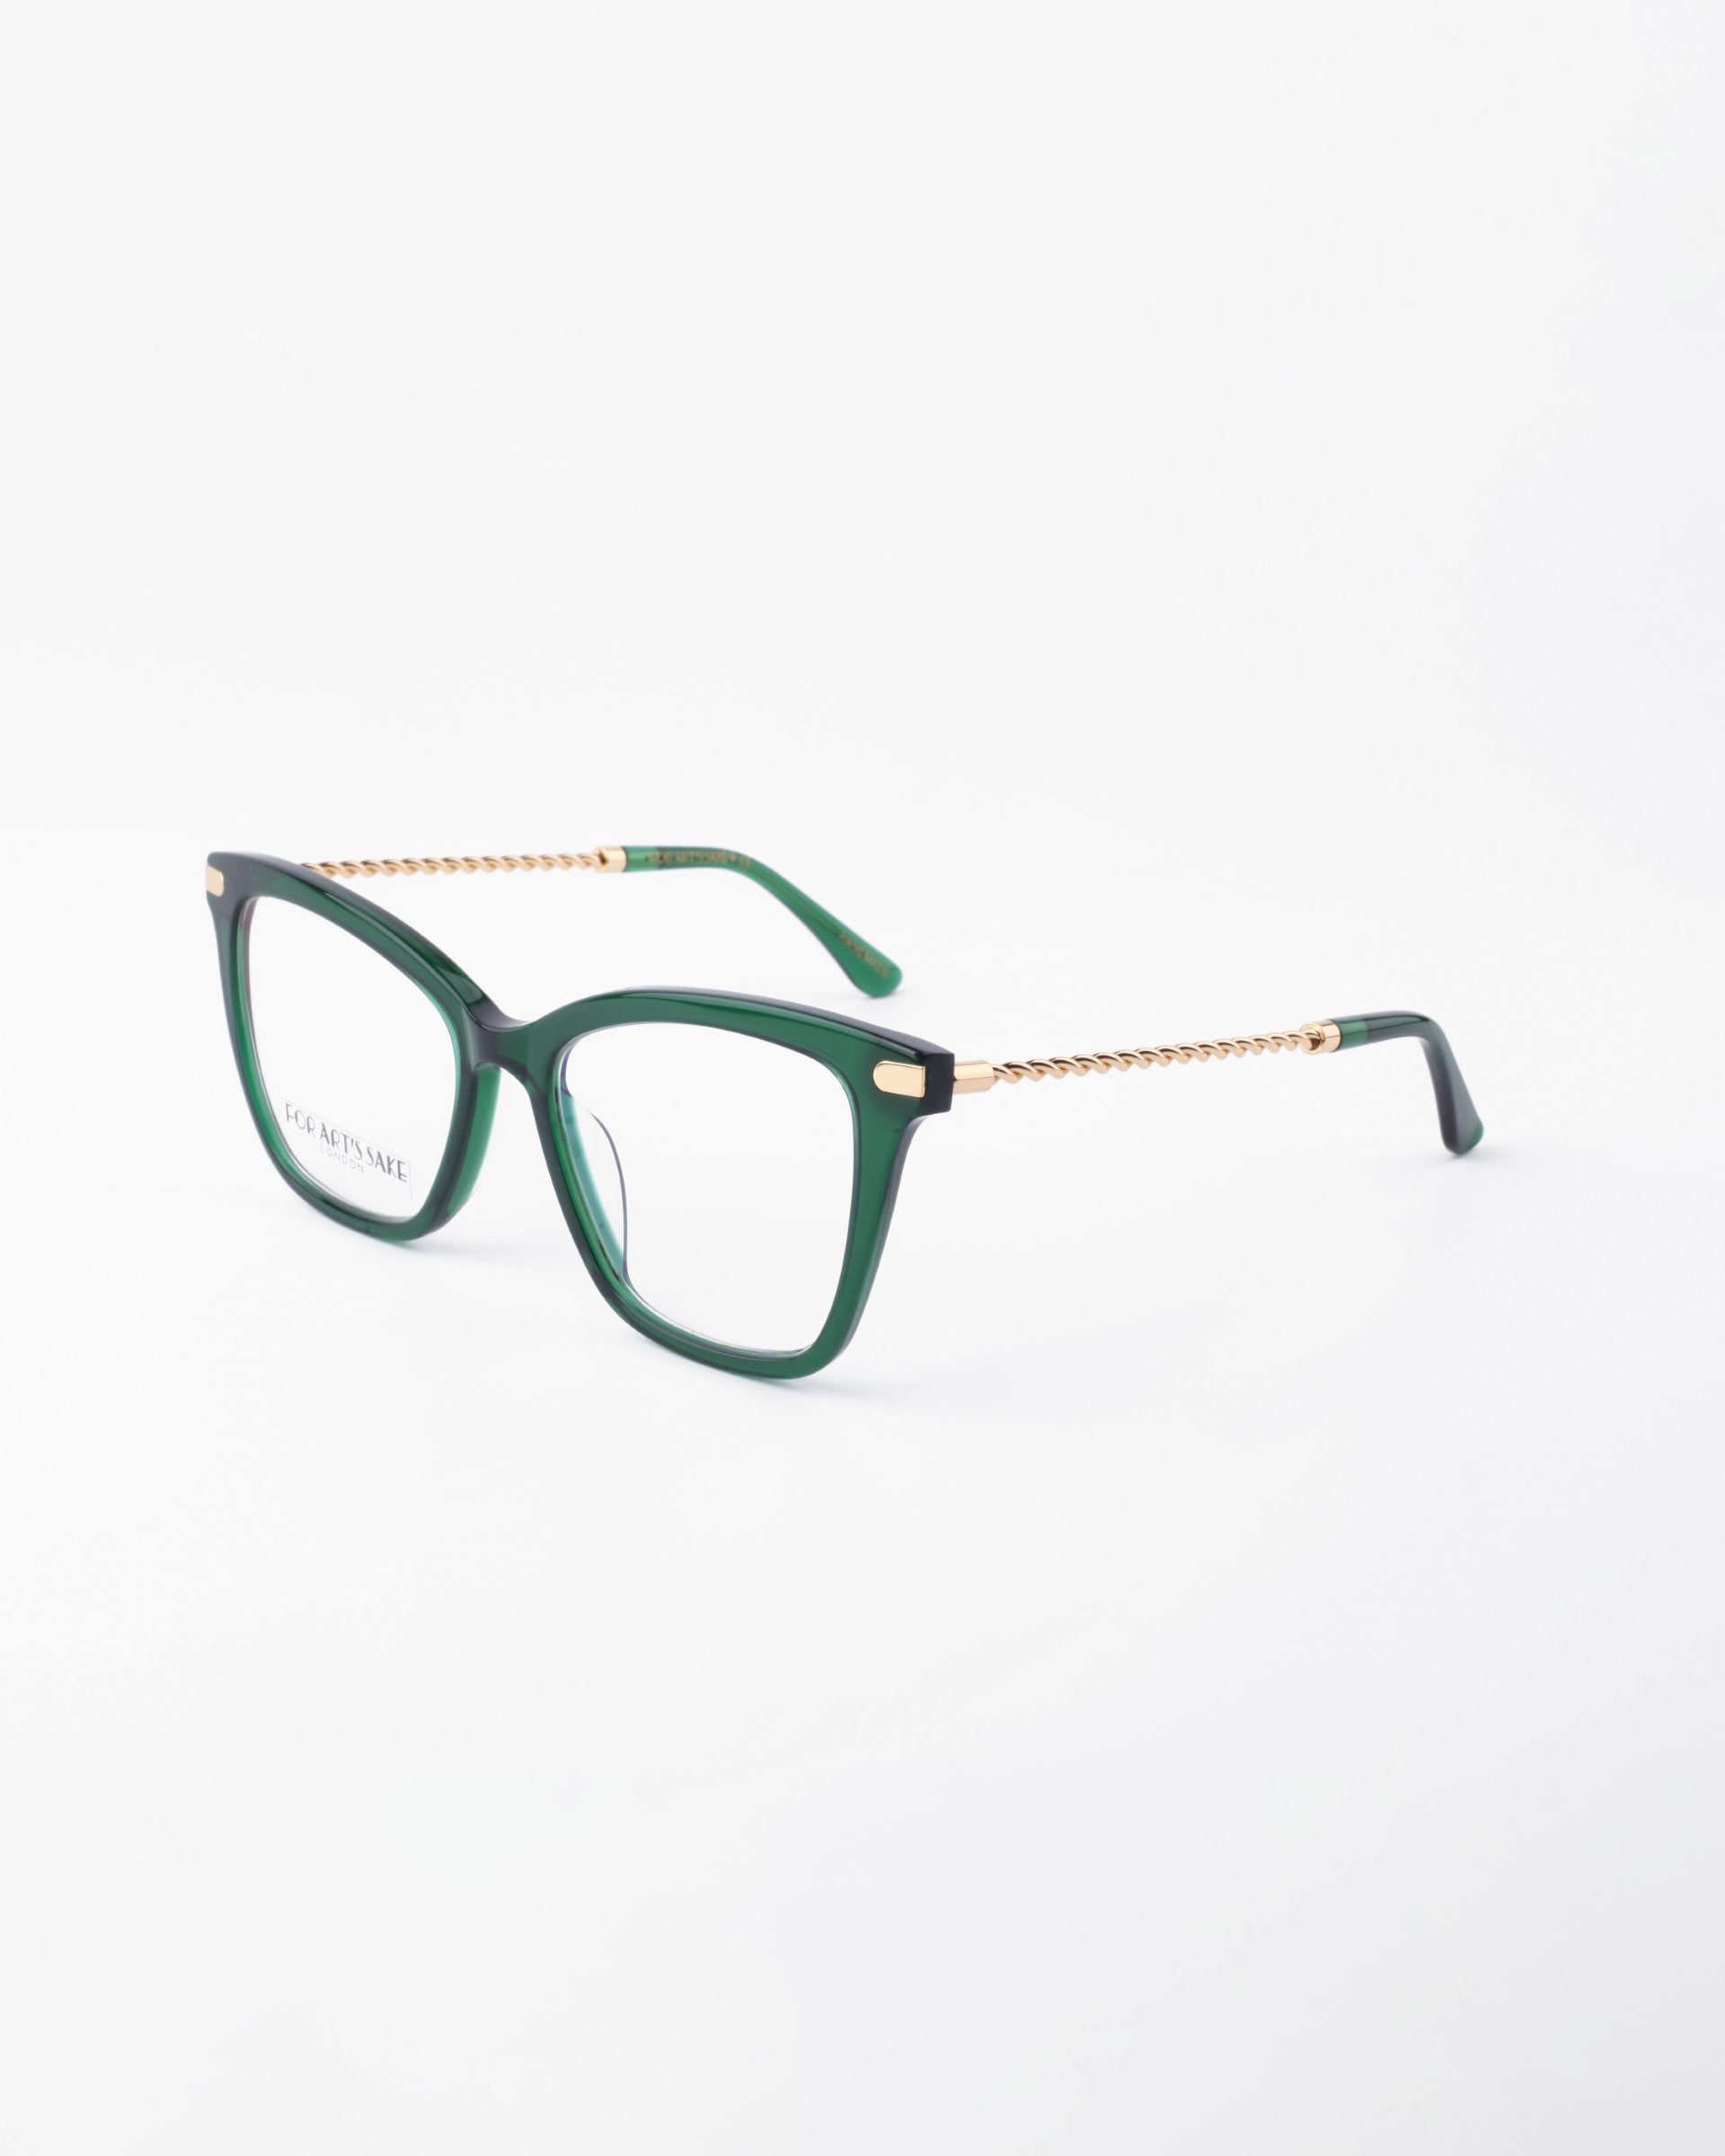 A pair of green Paris Two eyeglasses with square-shaped frames and gold braided metal arms by For Art's Sake® is displayed against a plain white background. The brand name is visible on the left lens. Designed with both classic and modern elements in mind, these glasses also feature a blue light filter for added protection.